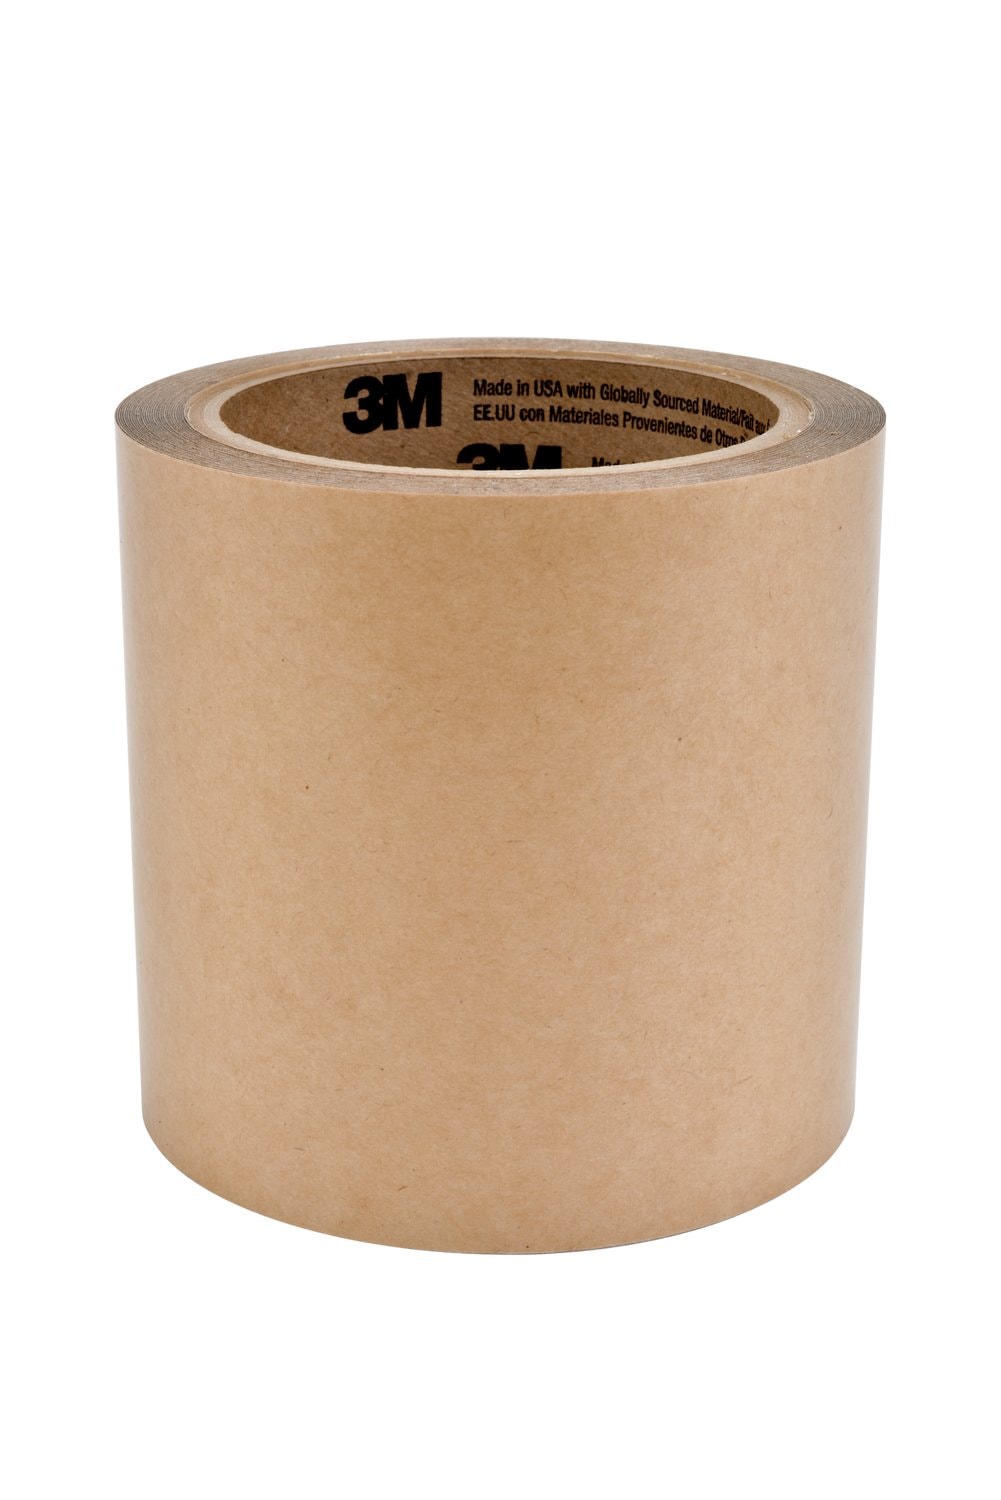 7010313376 - 3M Adhesive Transfer Tape L3+T5, Clear, 8 1/2 in x 11 in, 5 mil,
Sheets, Sample